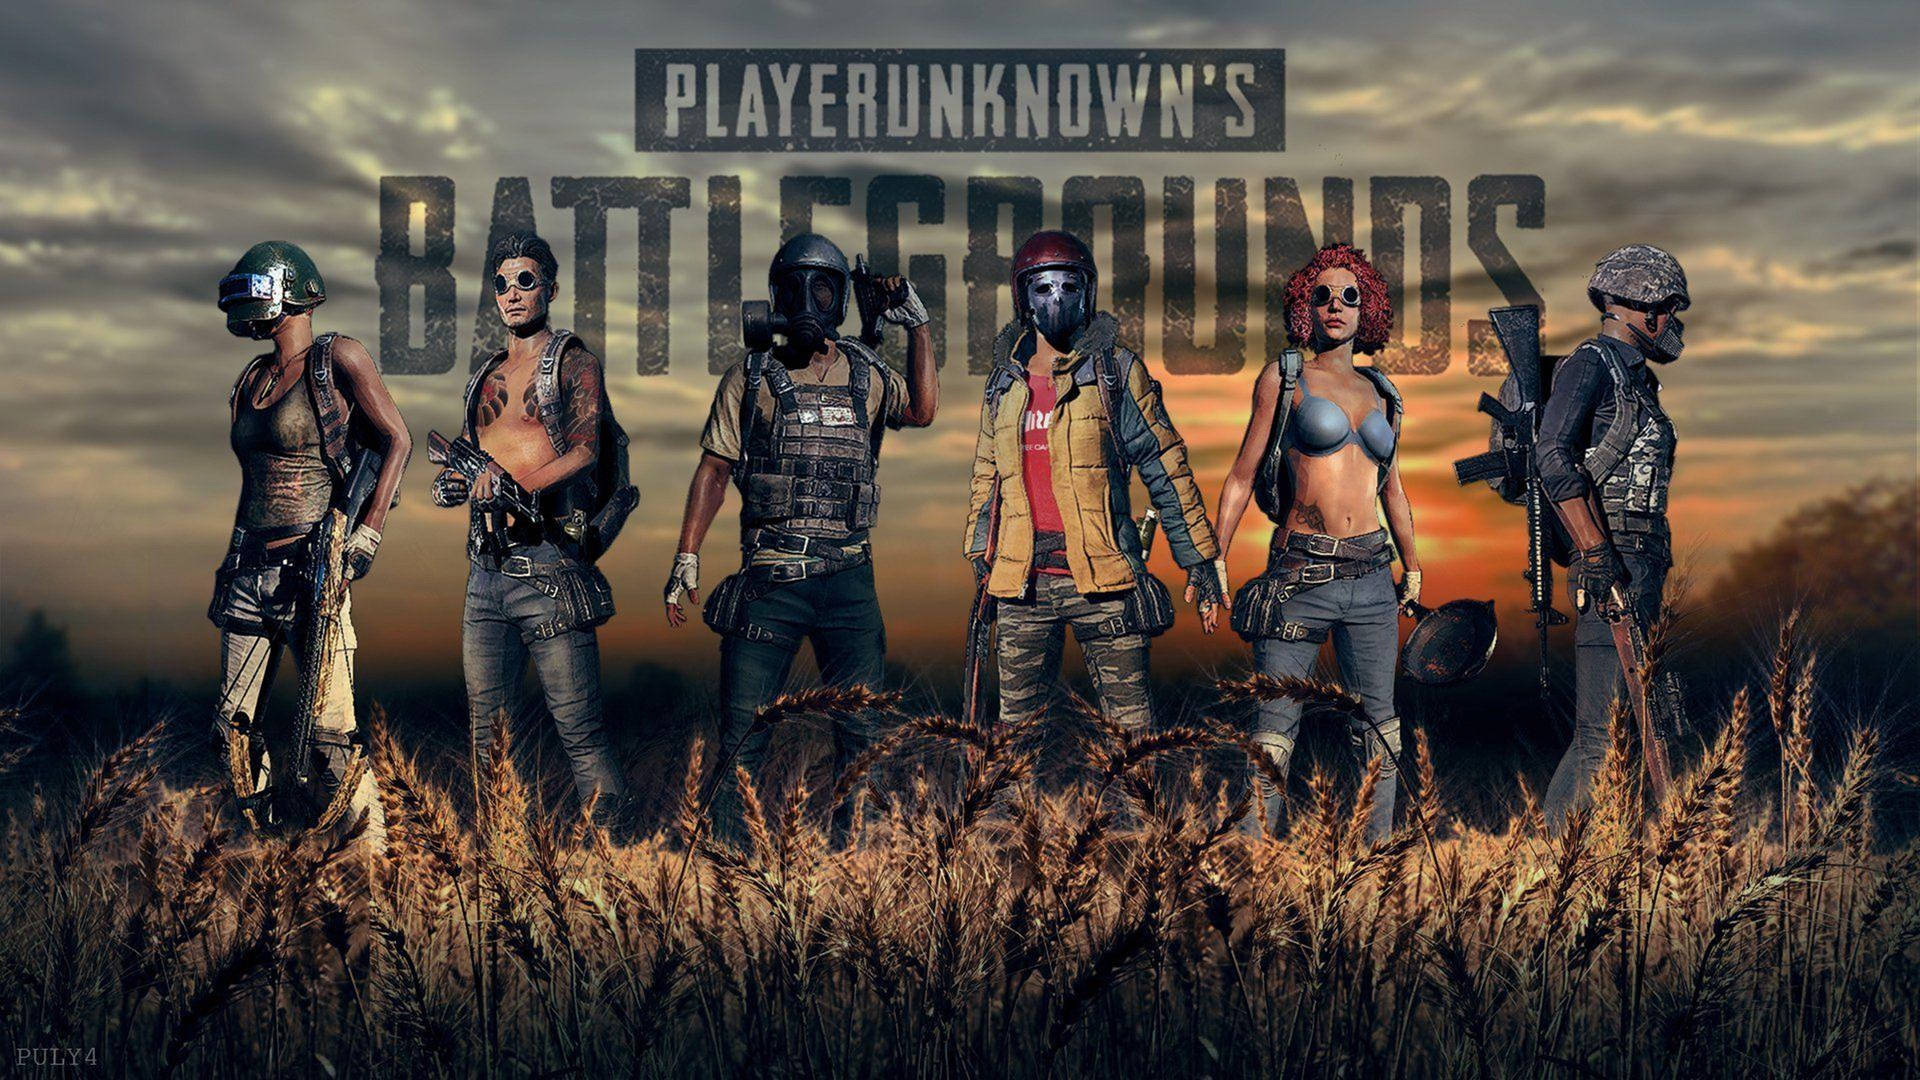 Player'sunknown Battleground Hd Mobile In Italian Can Be Translated As 